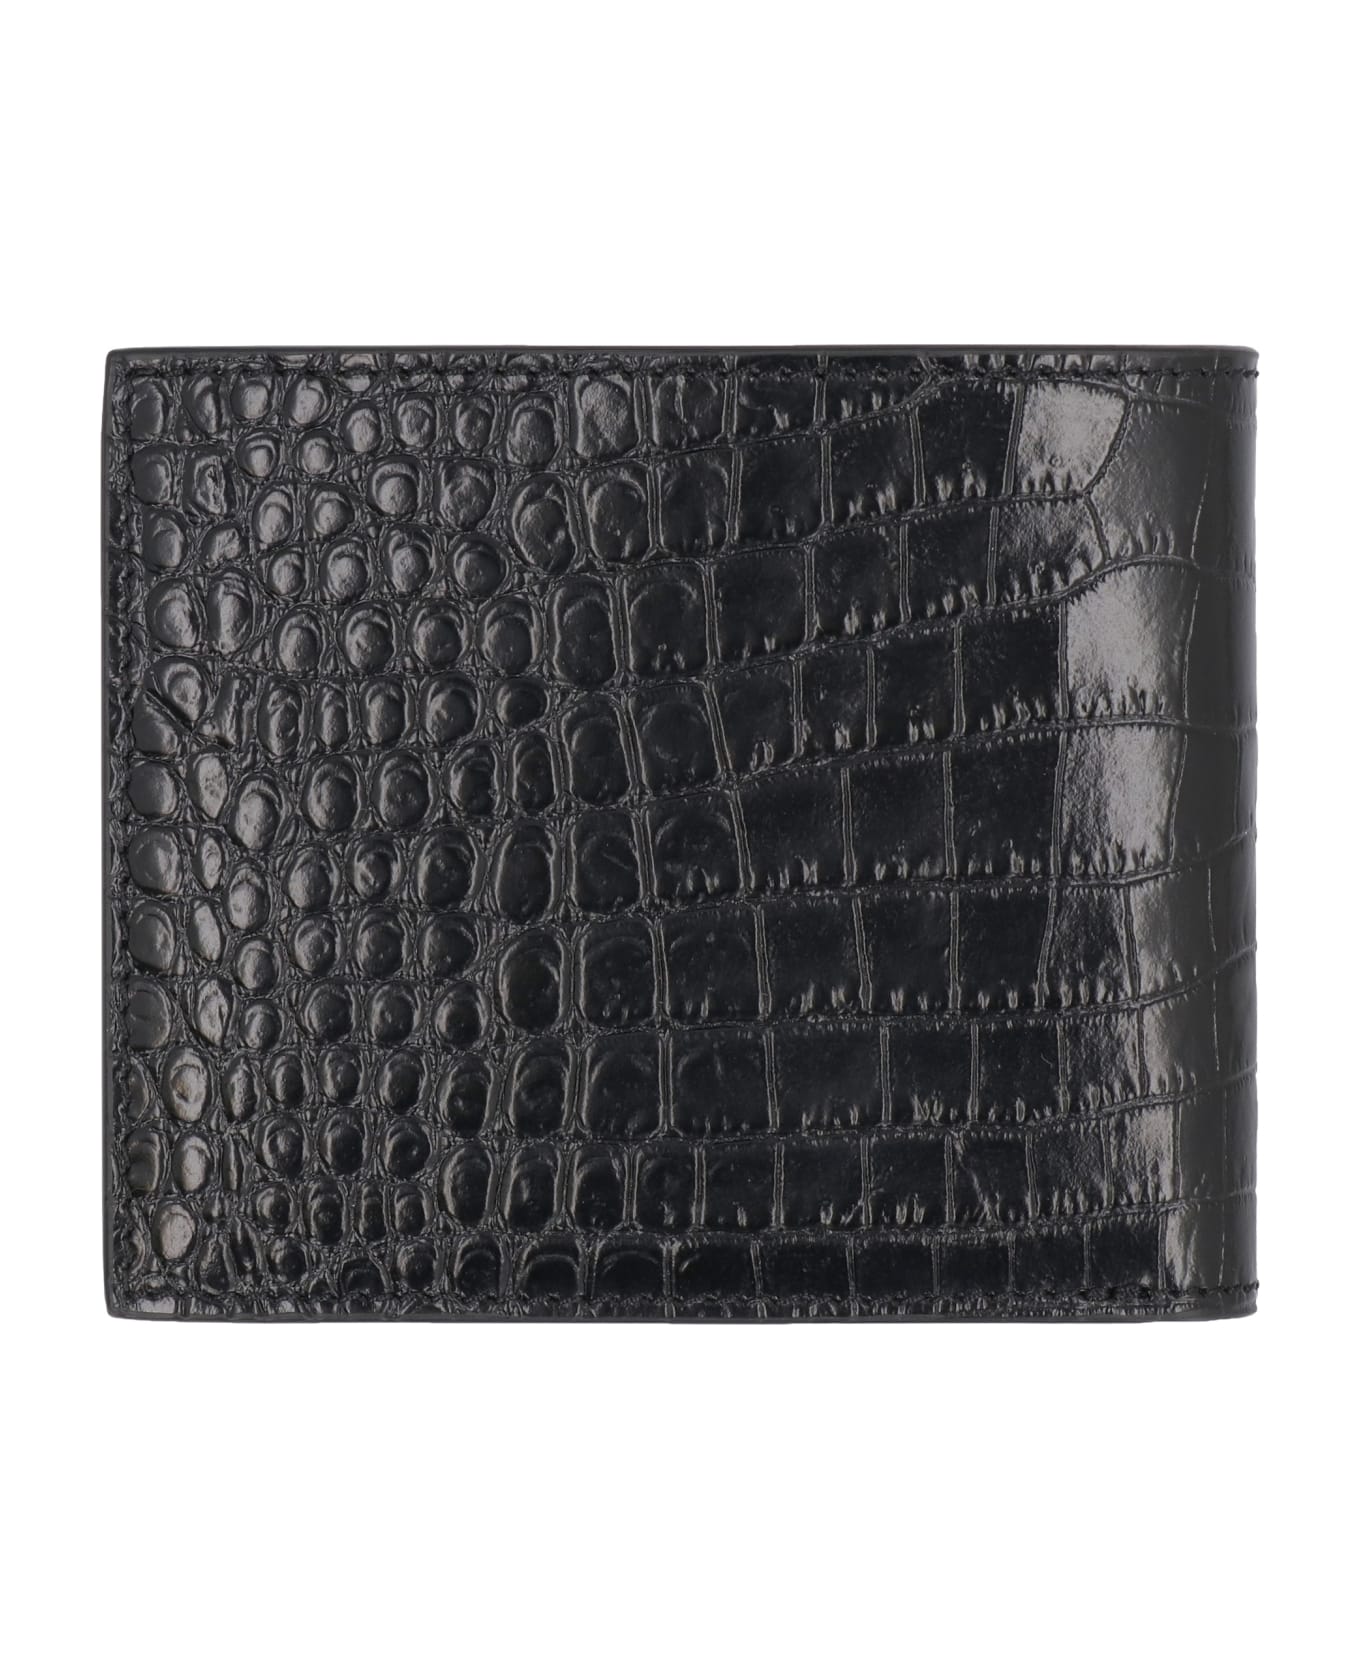 Tom Ford Leather Flap-over Wallet - Black 財布